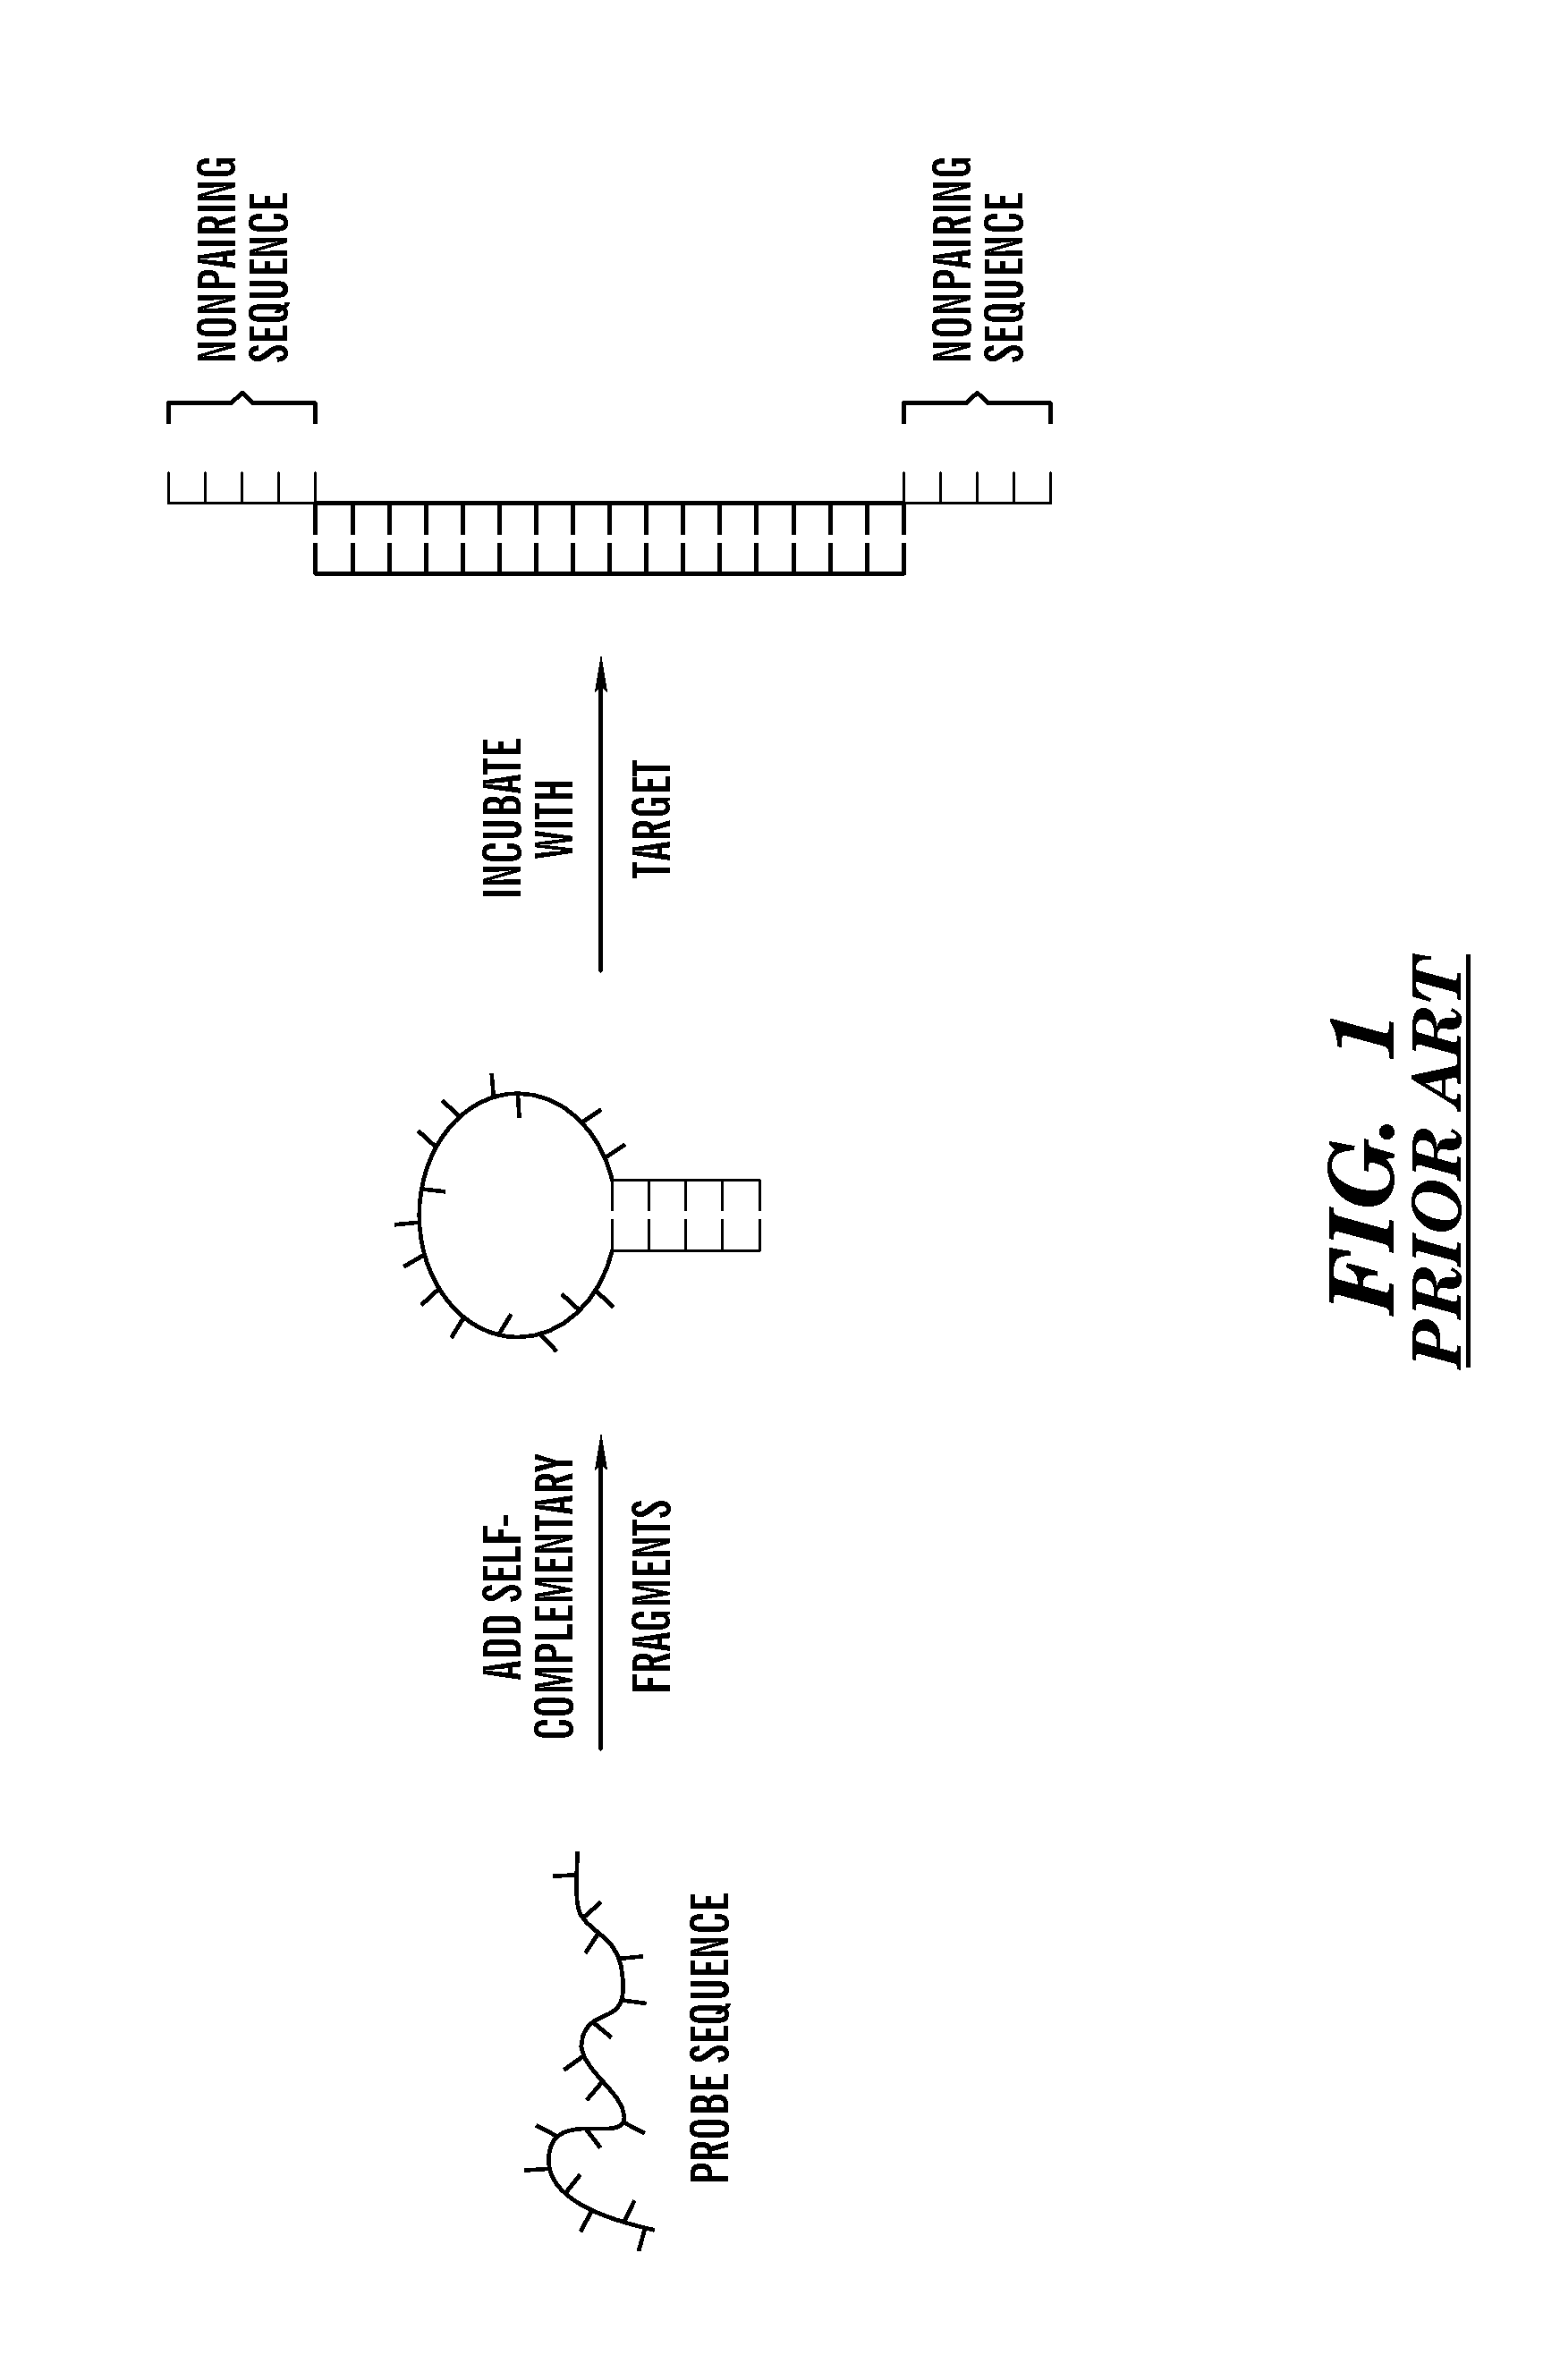 Method of identifying hairpin DNA probes by partial fold analysis